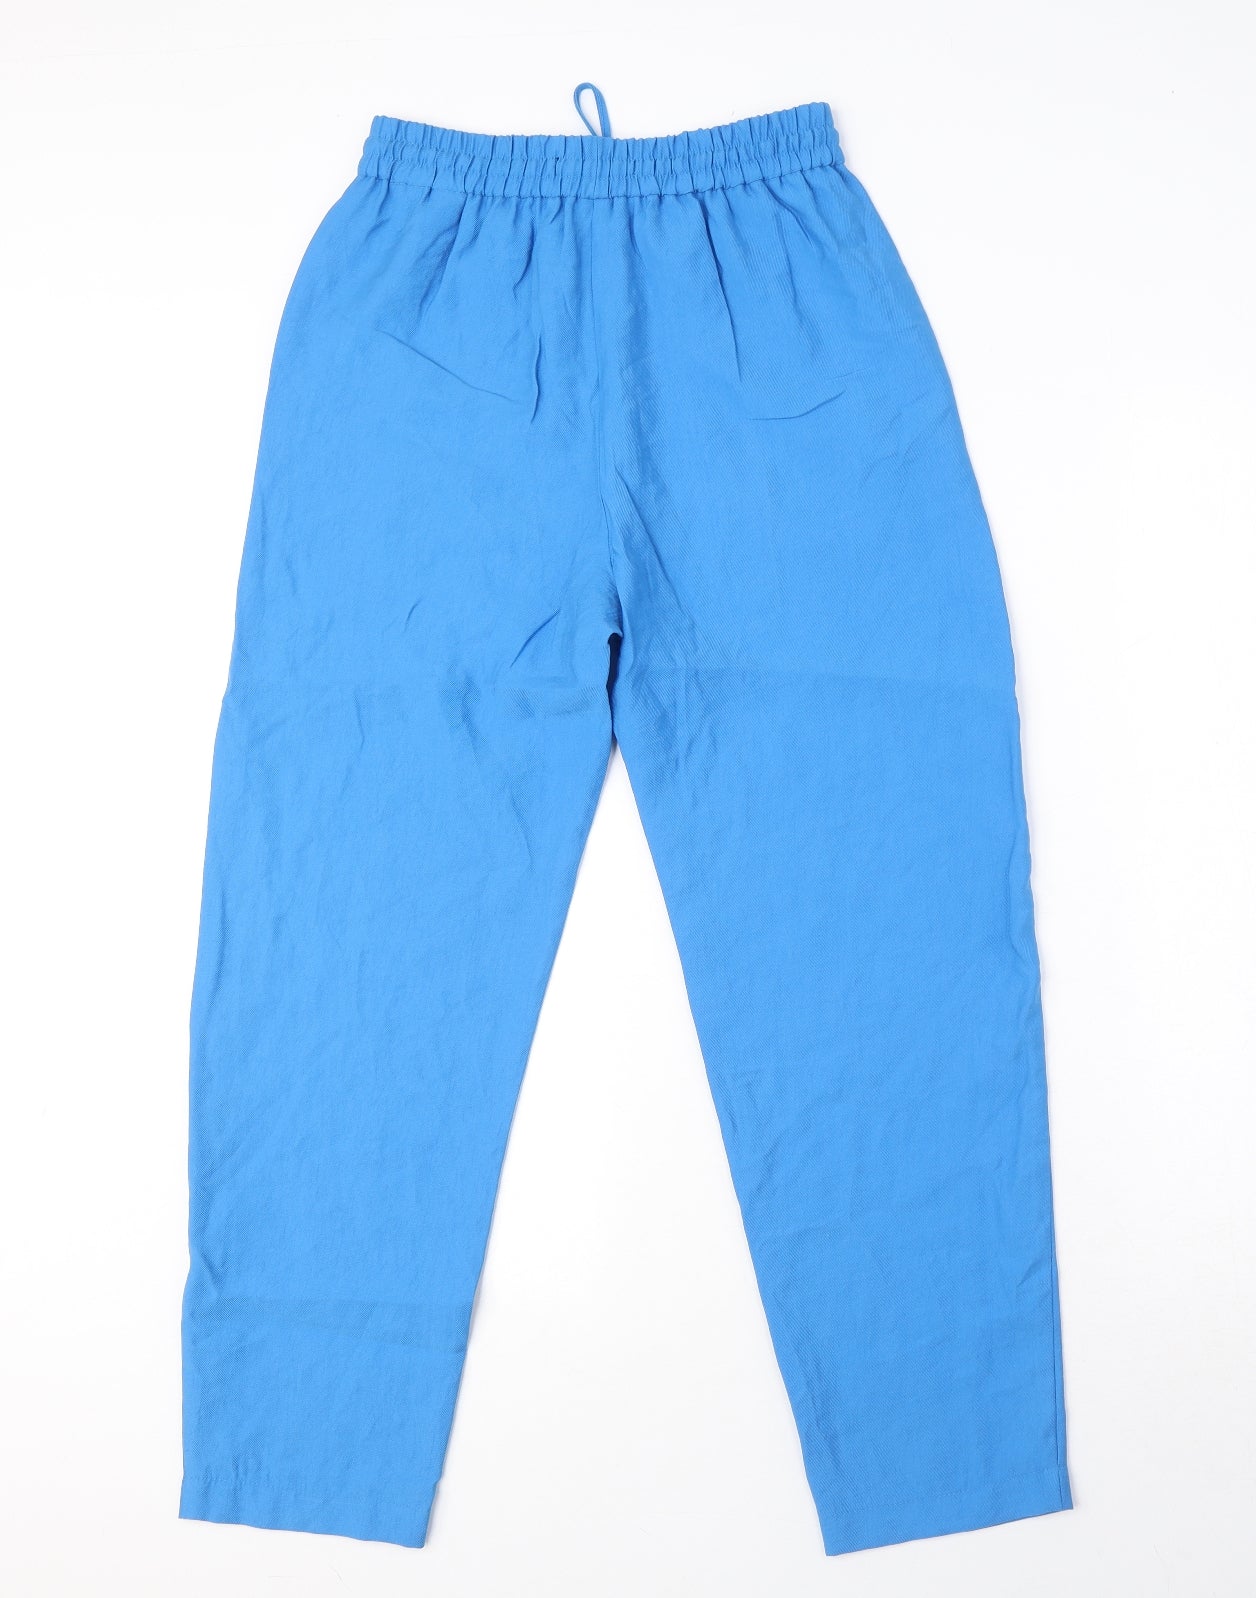 Marks and Spencer Womens Blue Lyocell Trousers Size 6 L26 in Regular Drawstring - waist 25